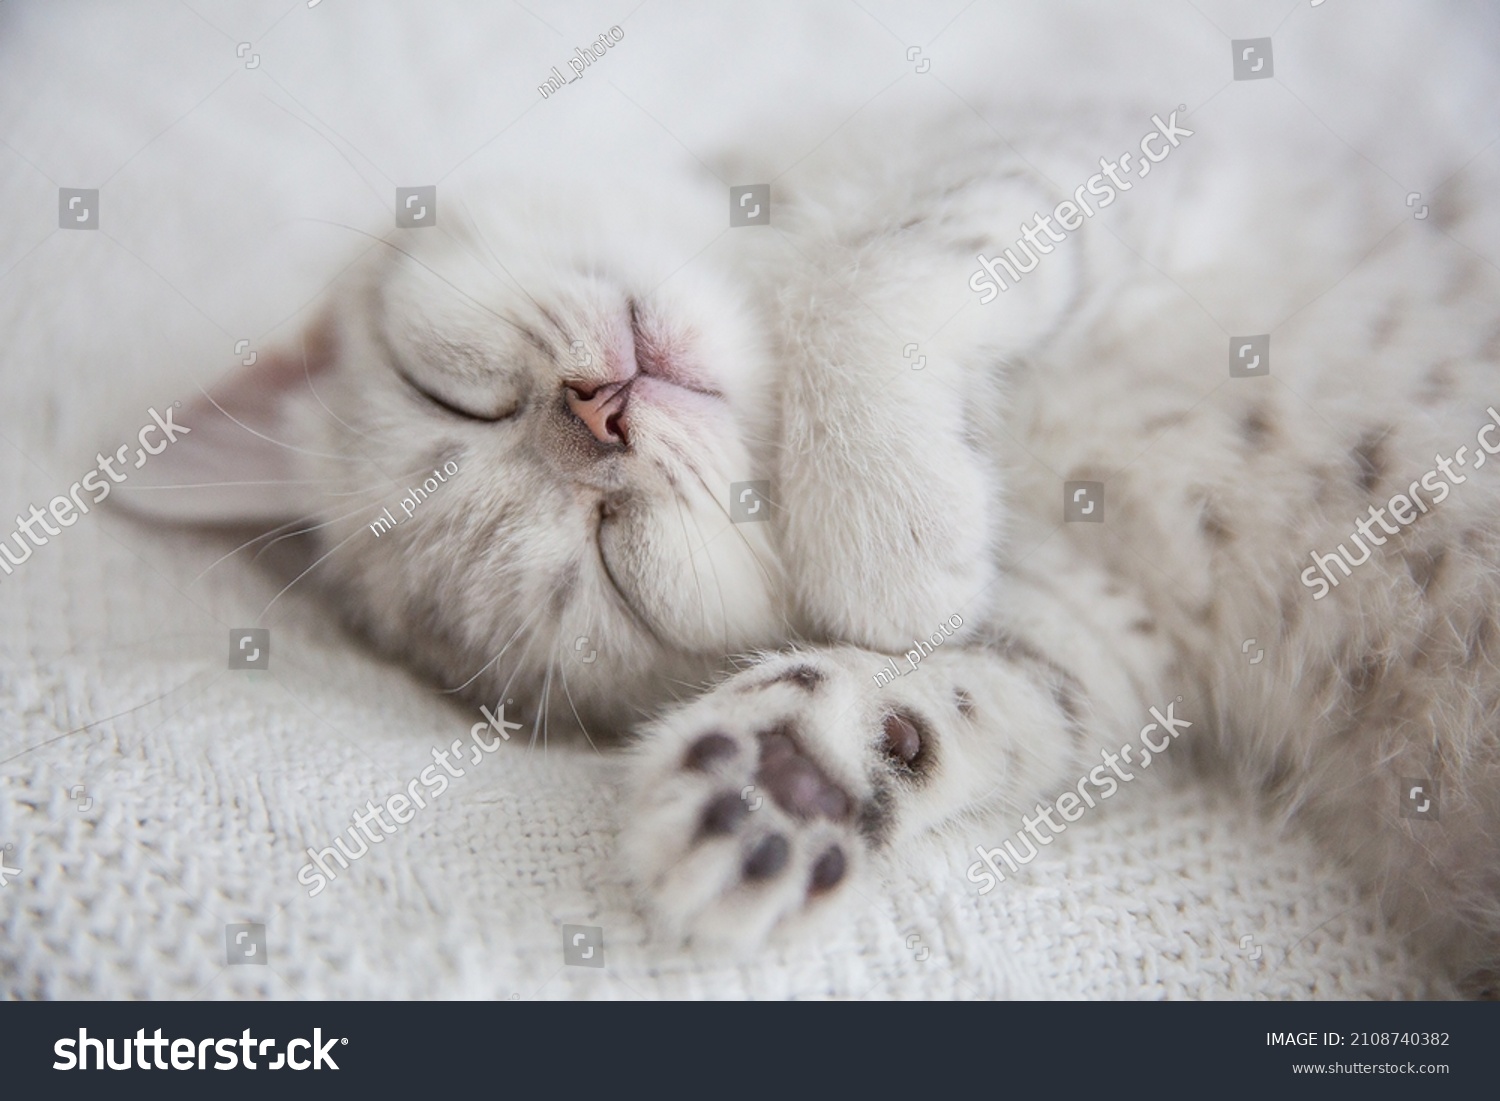 Cute tabby Scottish short hair silver kitten. Dreaming kittens sleep on a bed under warm white blanket. Pets sleep at cozy home. Top down view web banner. Funny adorable pets cats. Postcard concept. #2108740382